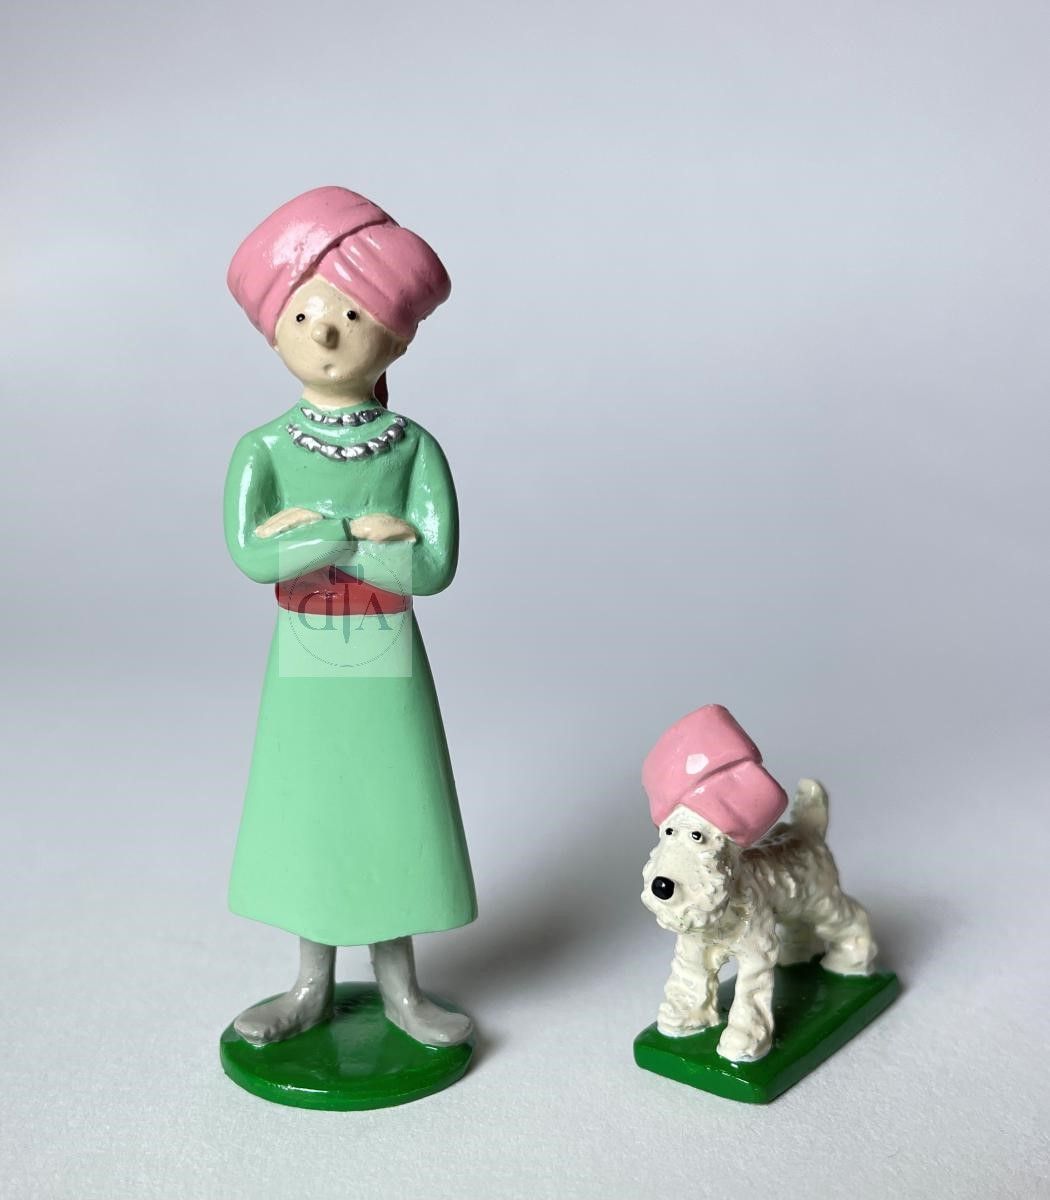 Null 
Hergé/Tintin. Ref Pixi 4523 "Tintin and Snowy in turban" from the album "L&hellip;